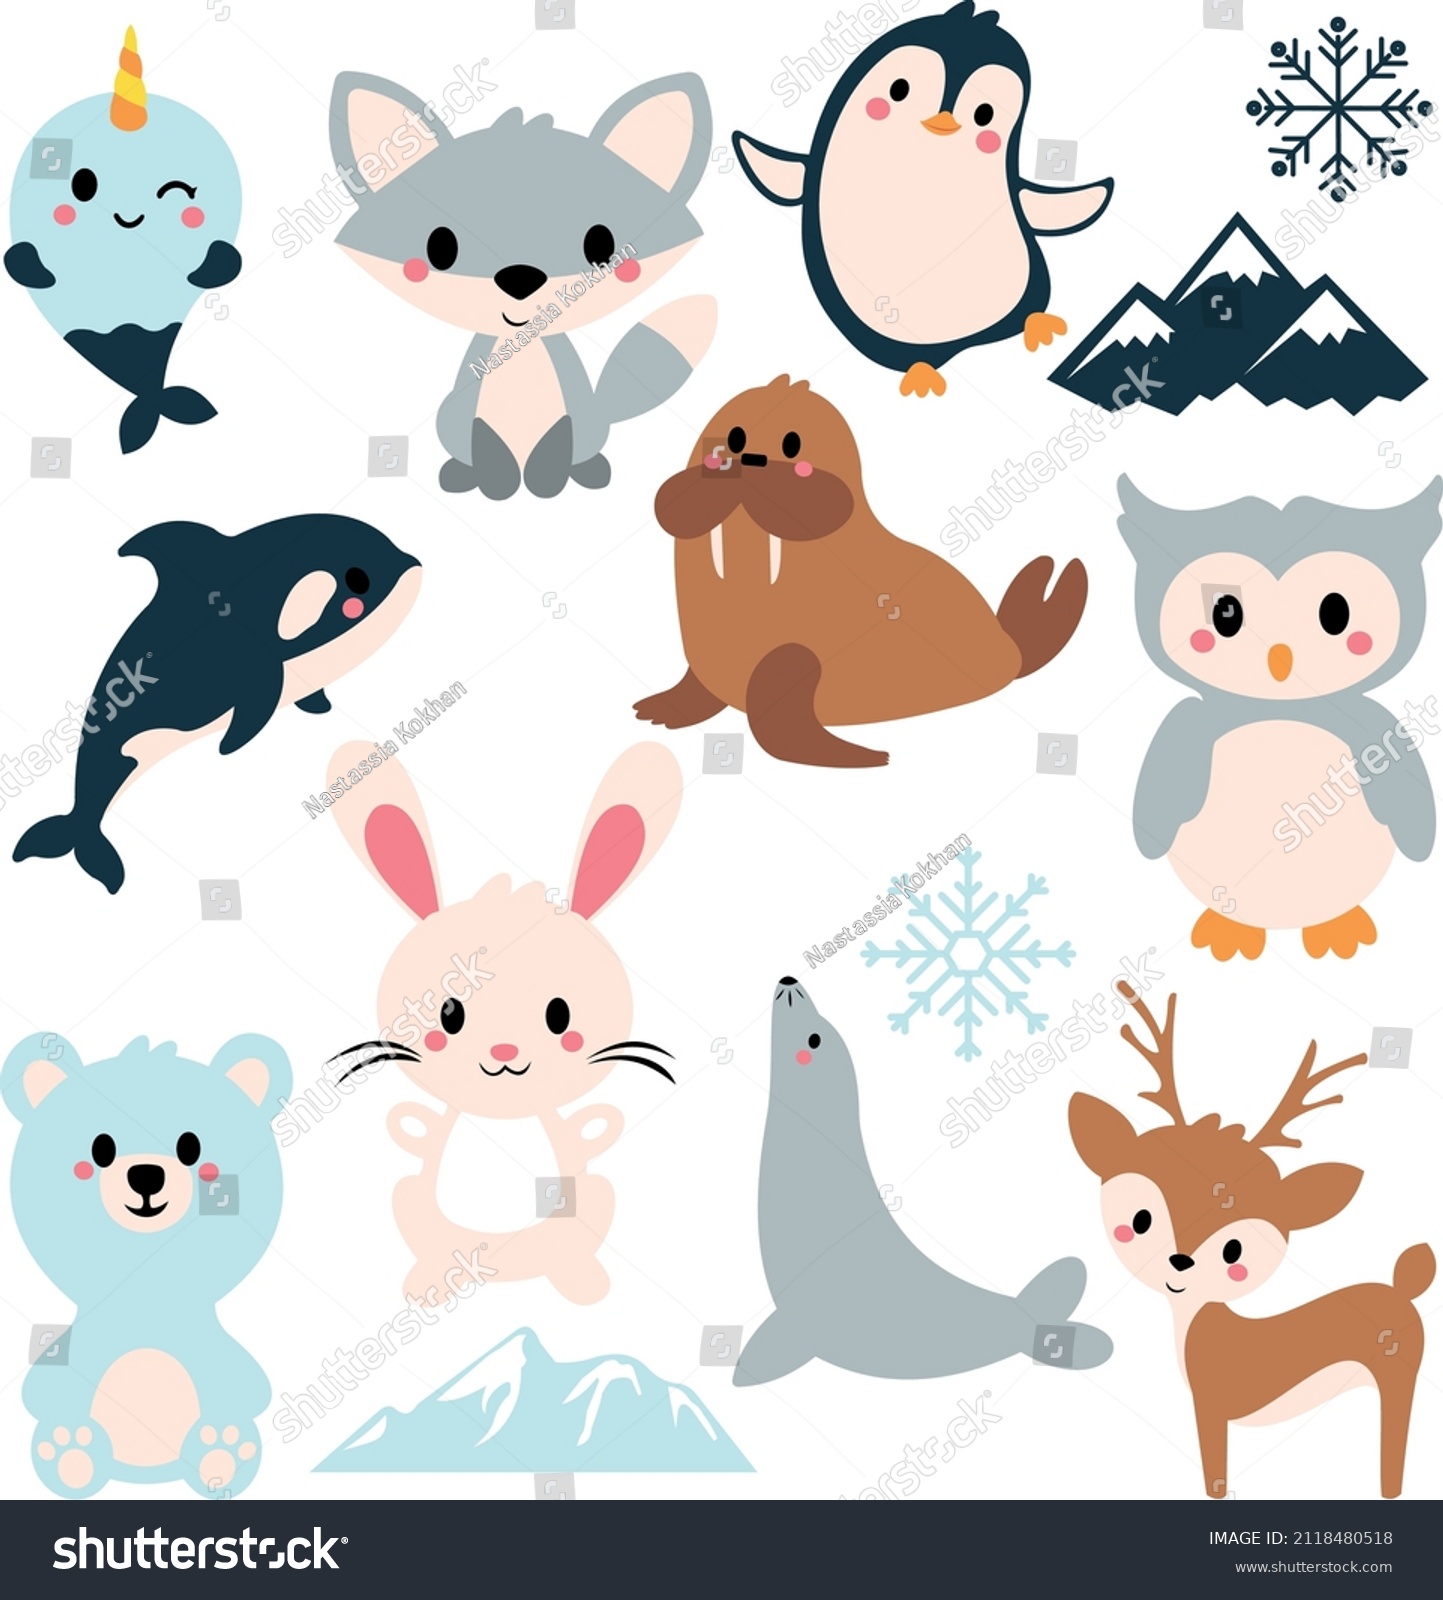 SVG of arctic animals svg vector Illustration isolated on white background. Pegnuin walrus svg fur seal svg rabbit bear fox dolphin svg. winter illustrarion. Vector collection of polar animals svg